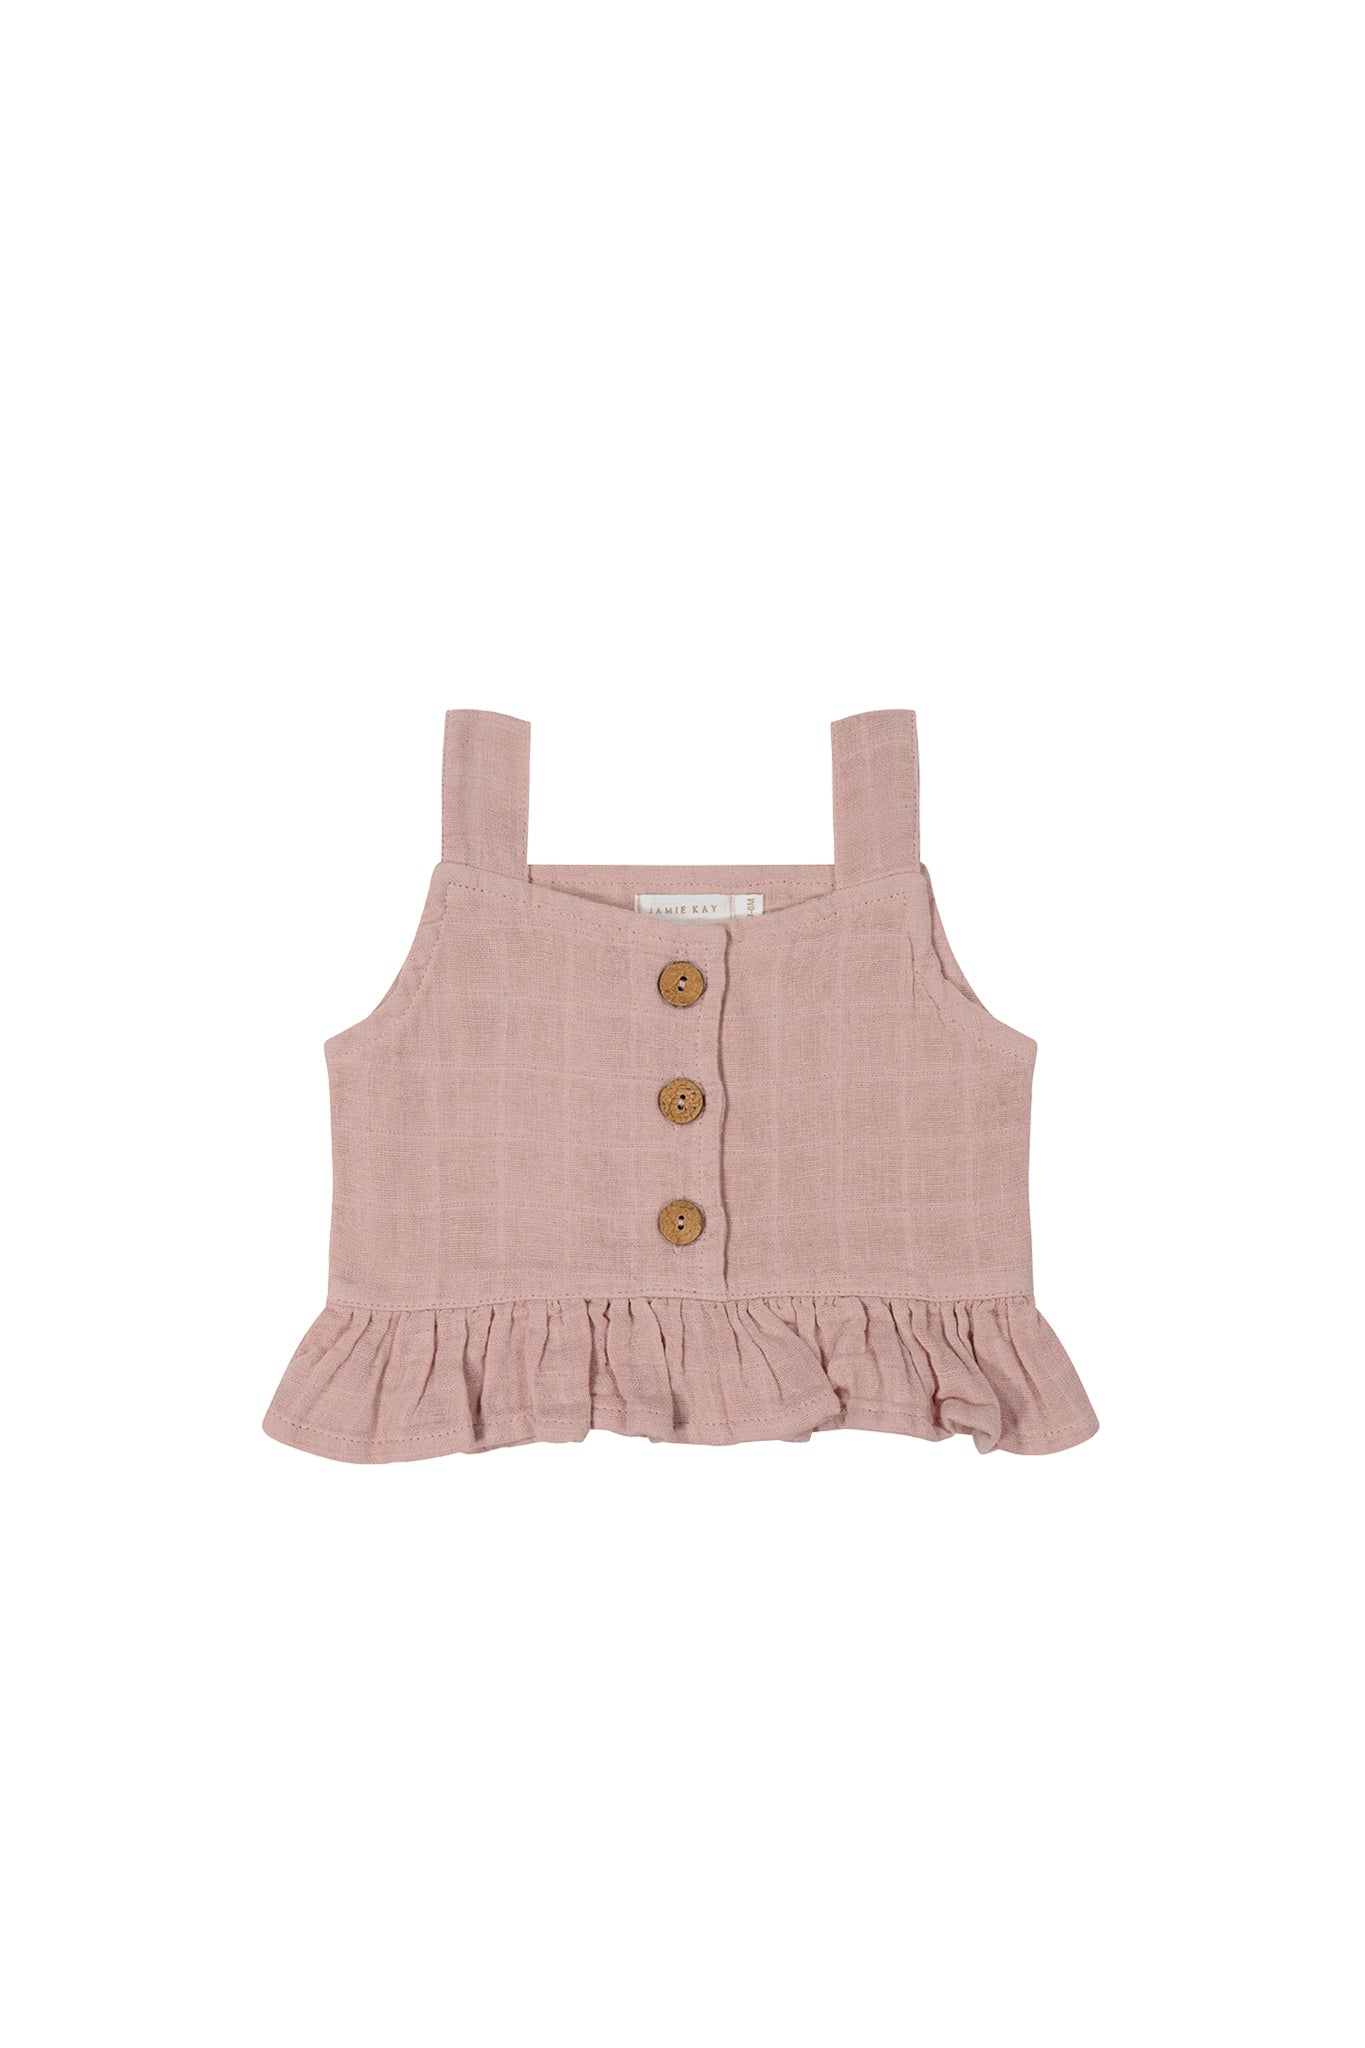 Organic Cotton Muslin Indie Top - Powder Pink-Clothing & Accessories-Jamie Kay-The Bay Room